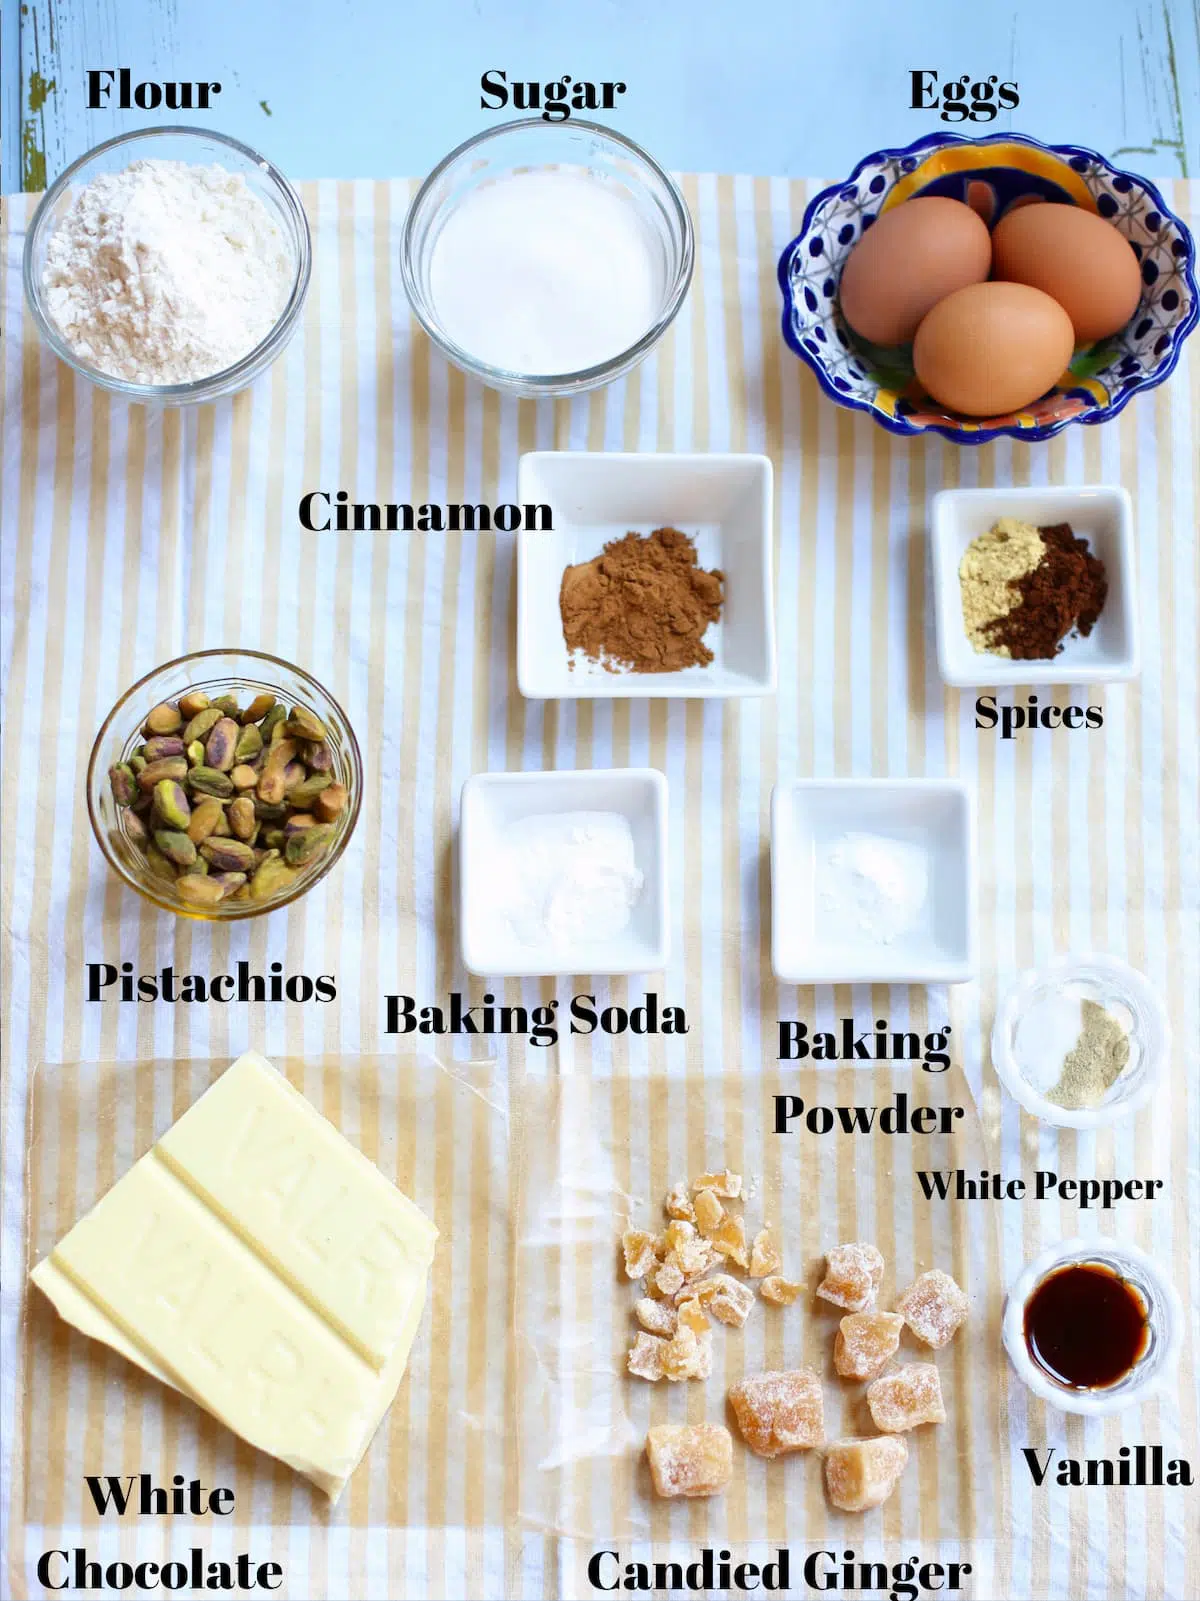 a table of ingredients for cookies, pisachios, white chocolate, cinnamon, spices, baking powder, bakig soda and vanilla.